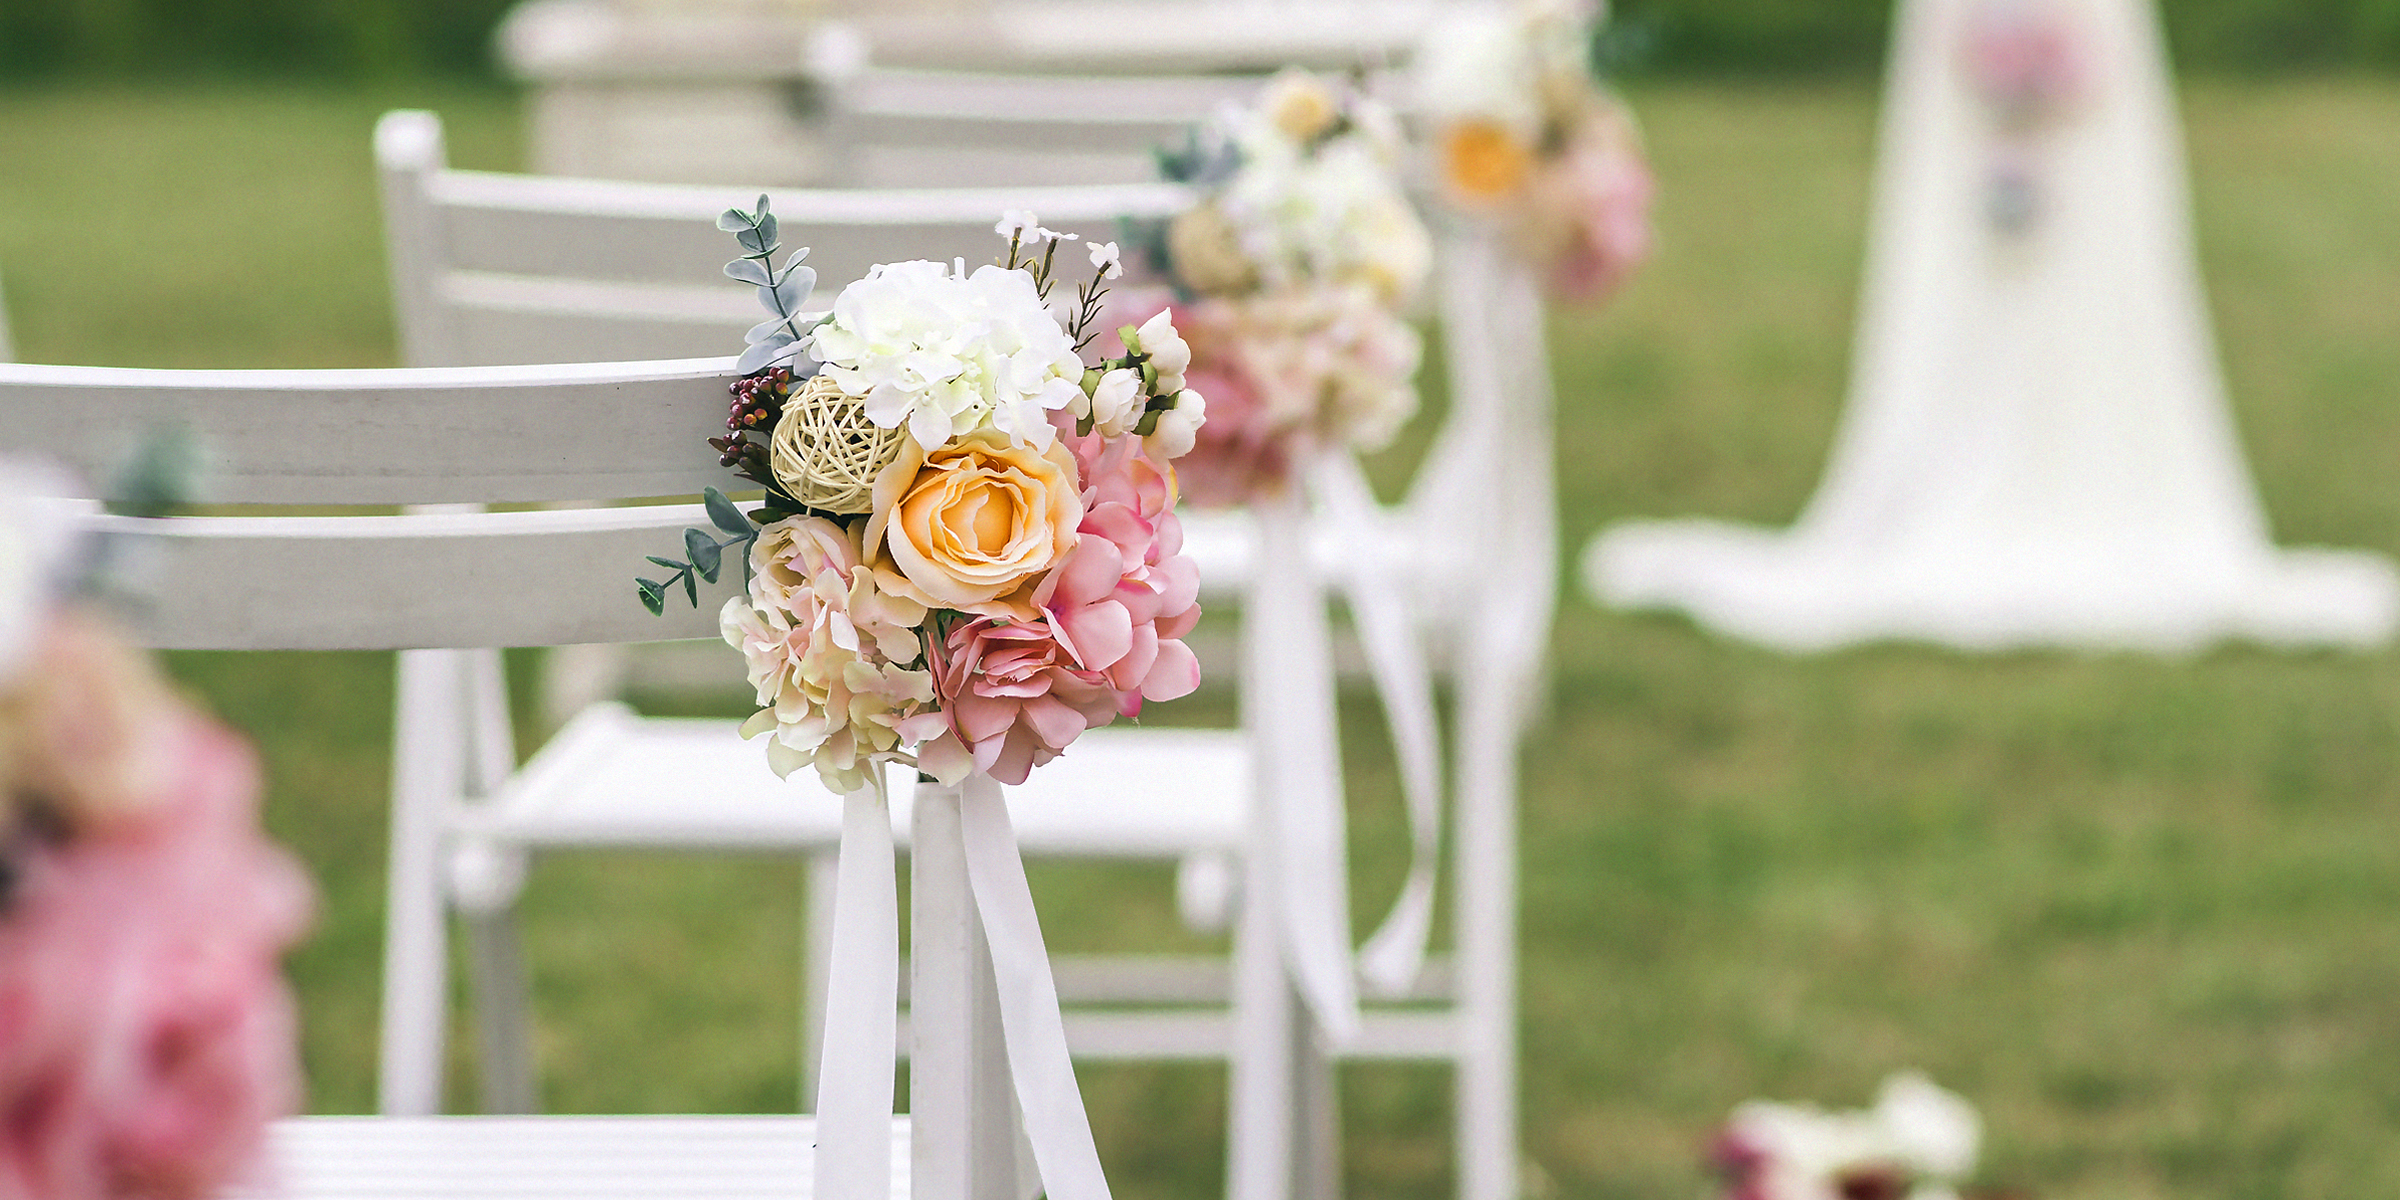 Chair with flowers on wedding | Shutterstock